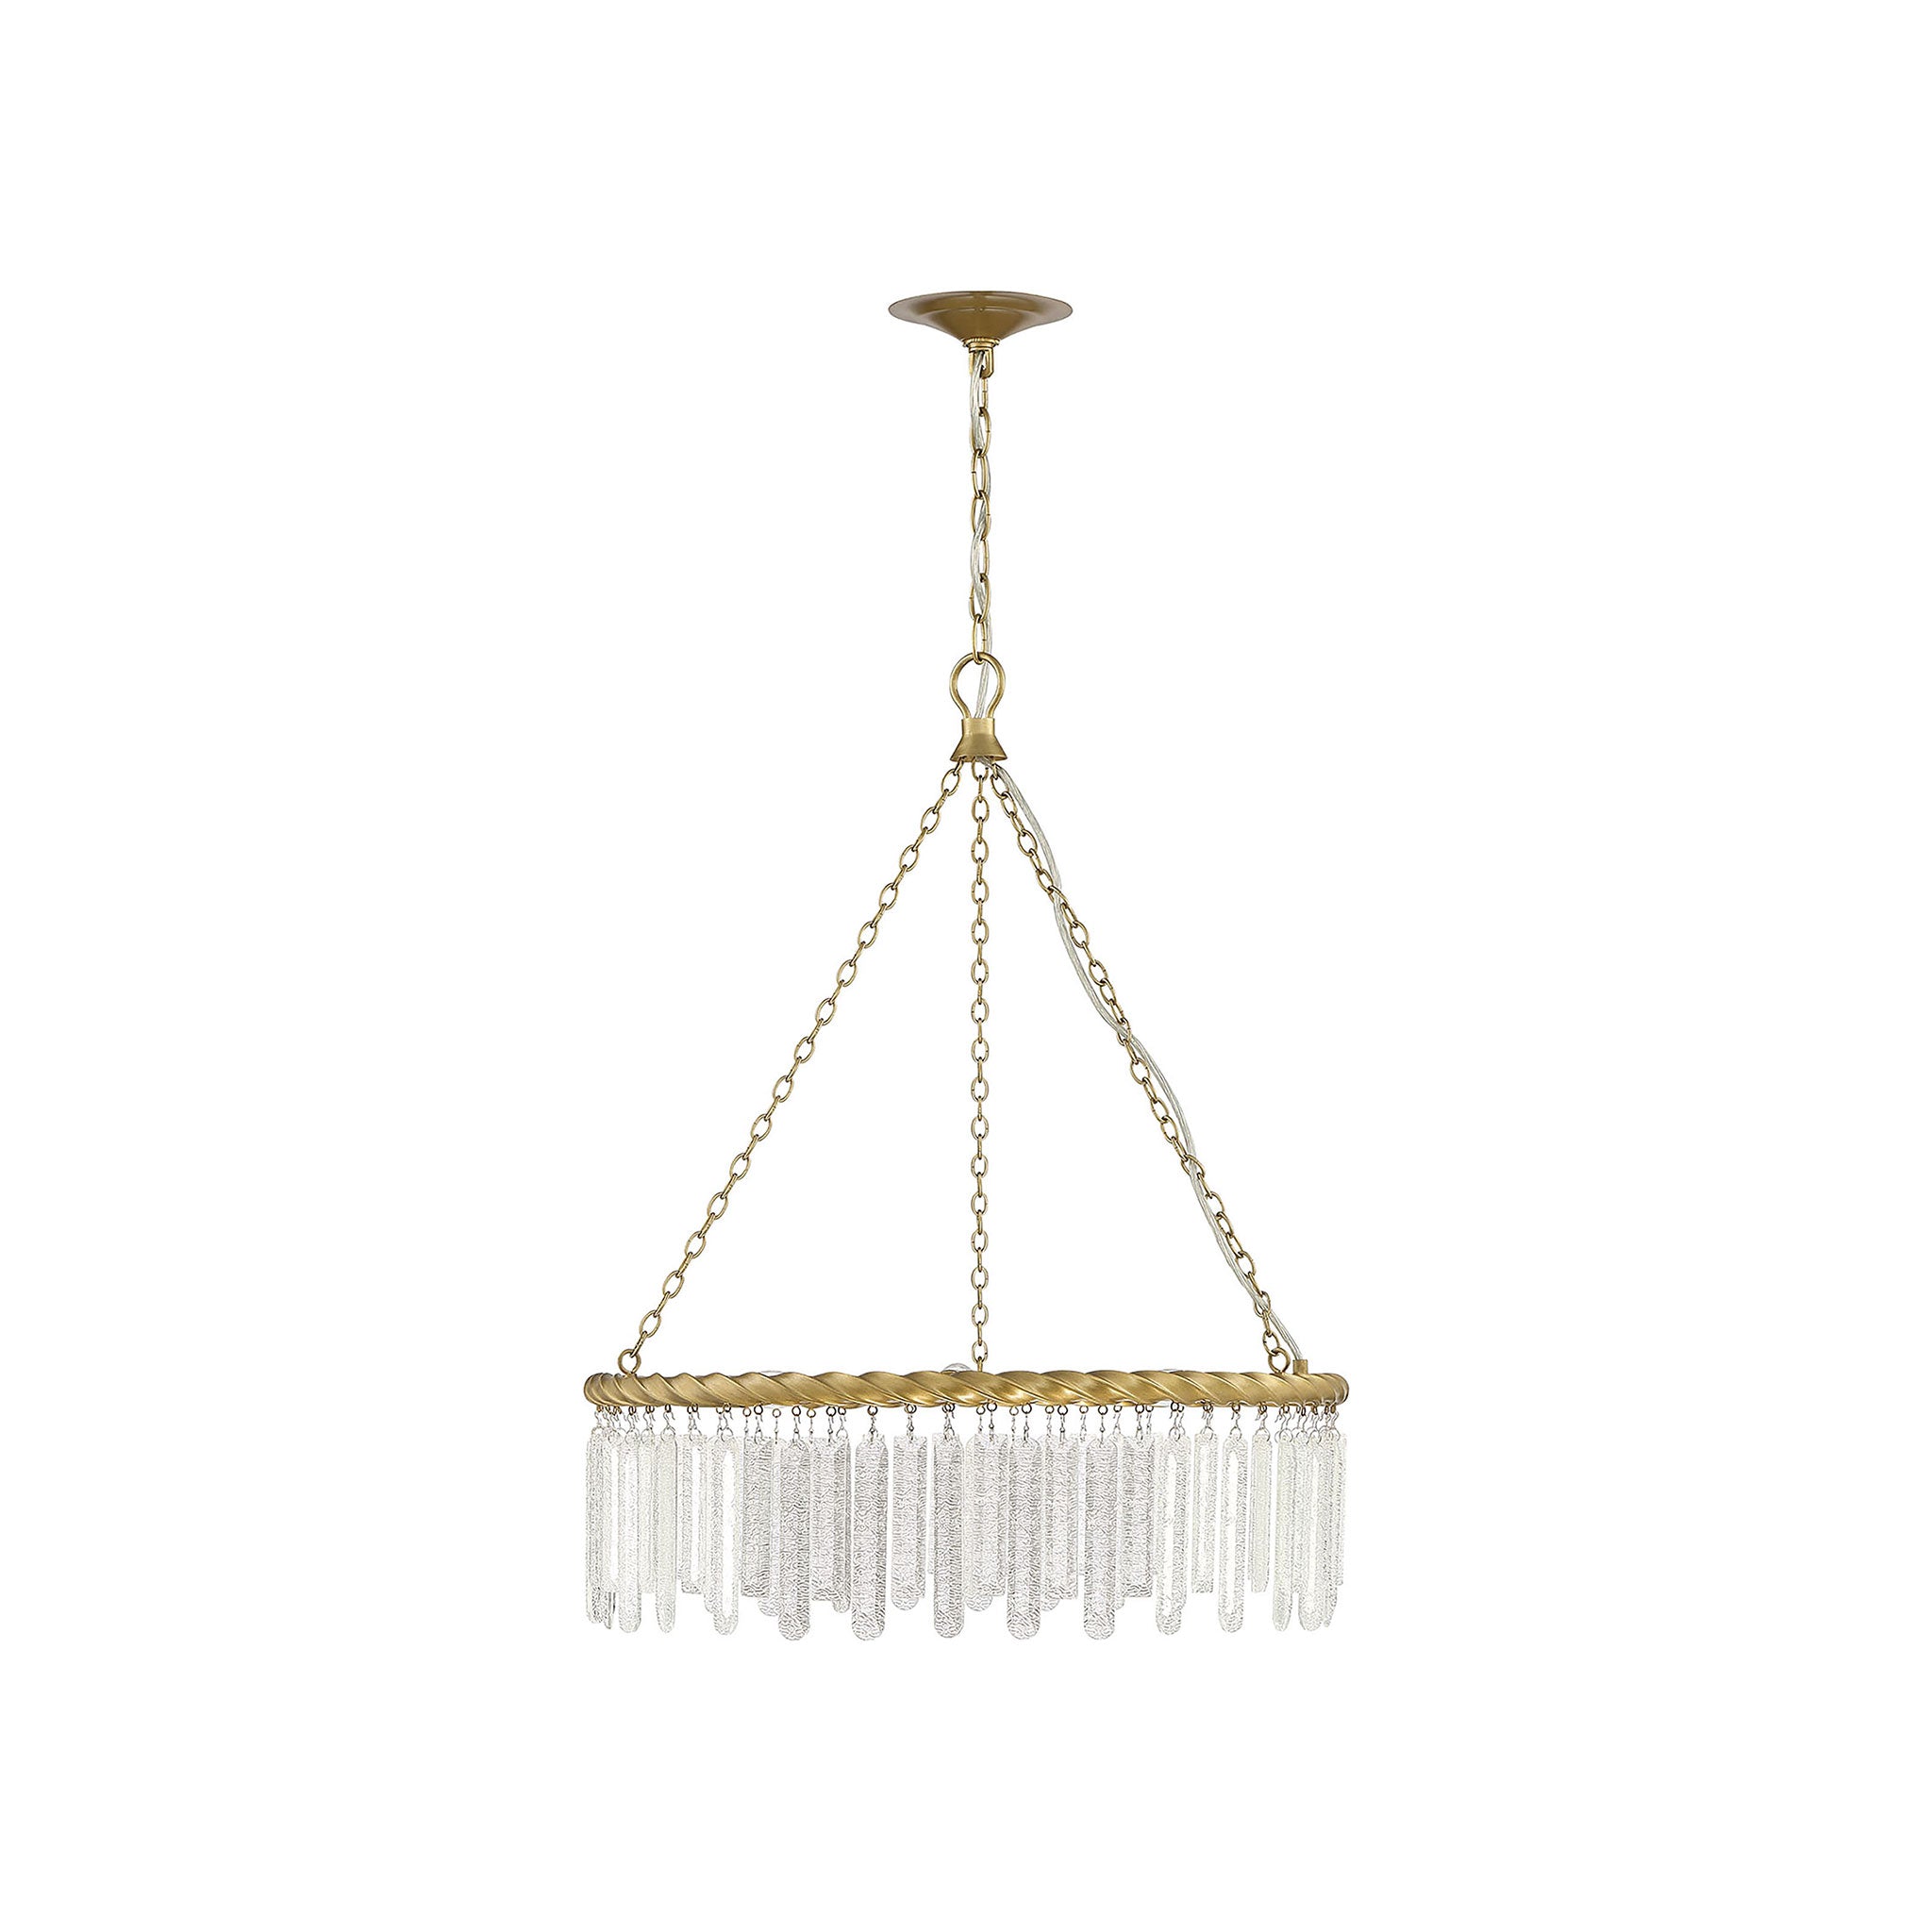 Reflection Brass and Crystal 3-Light Circular Contemporary Chandelier